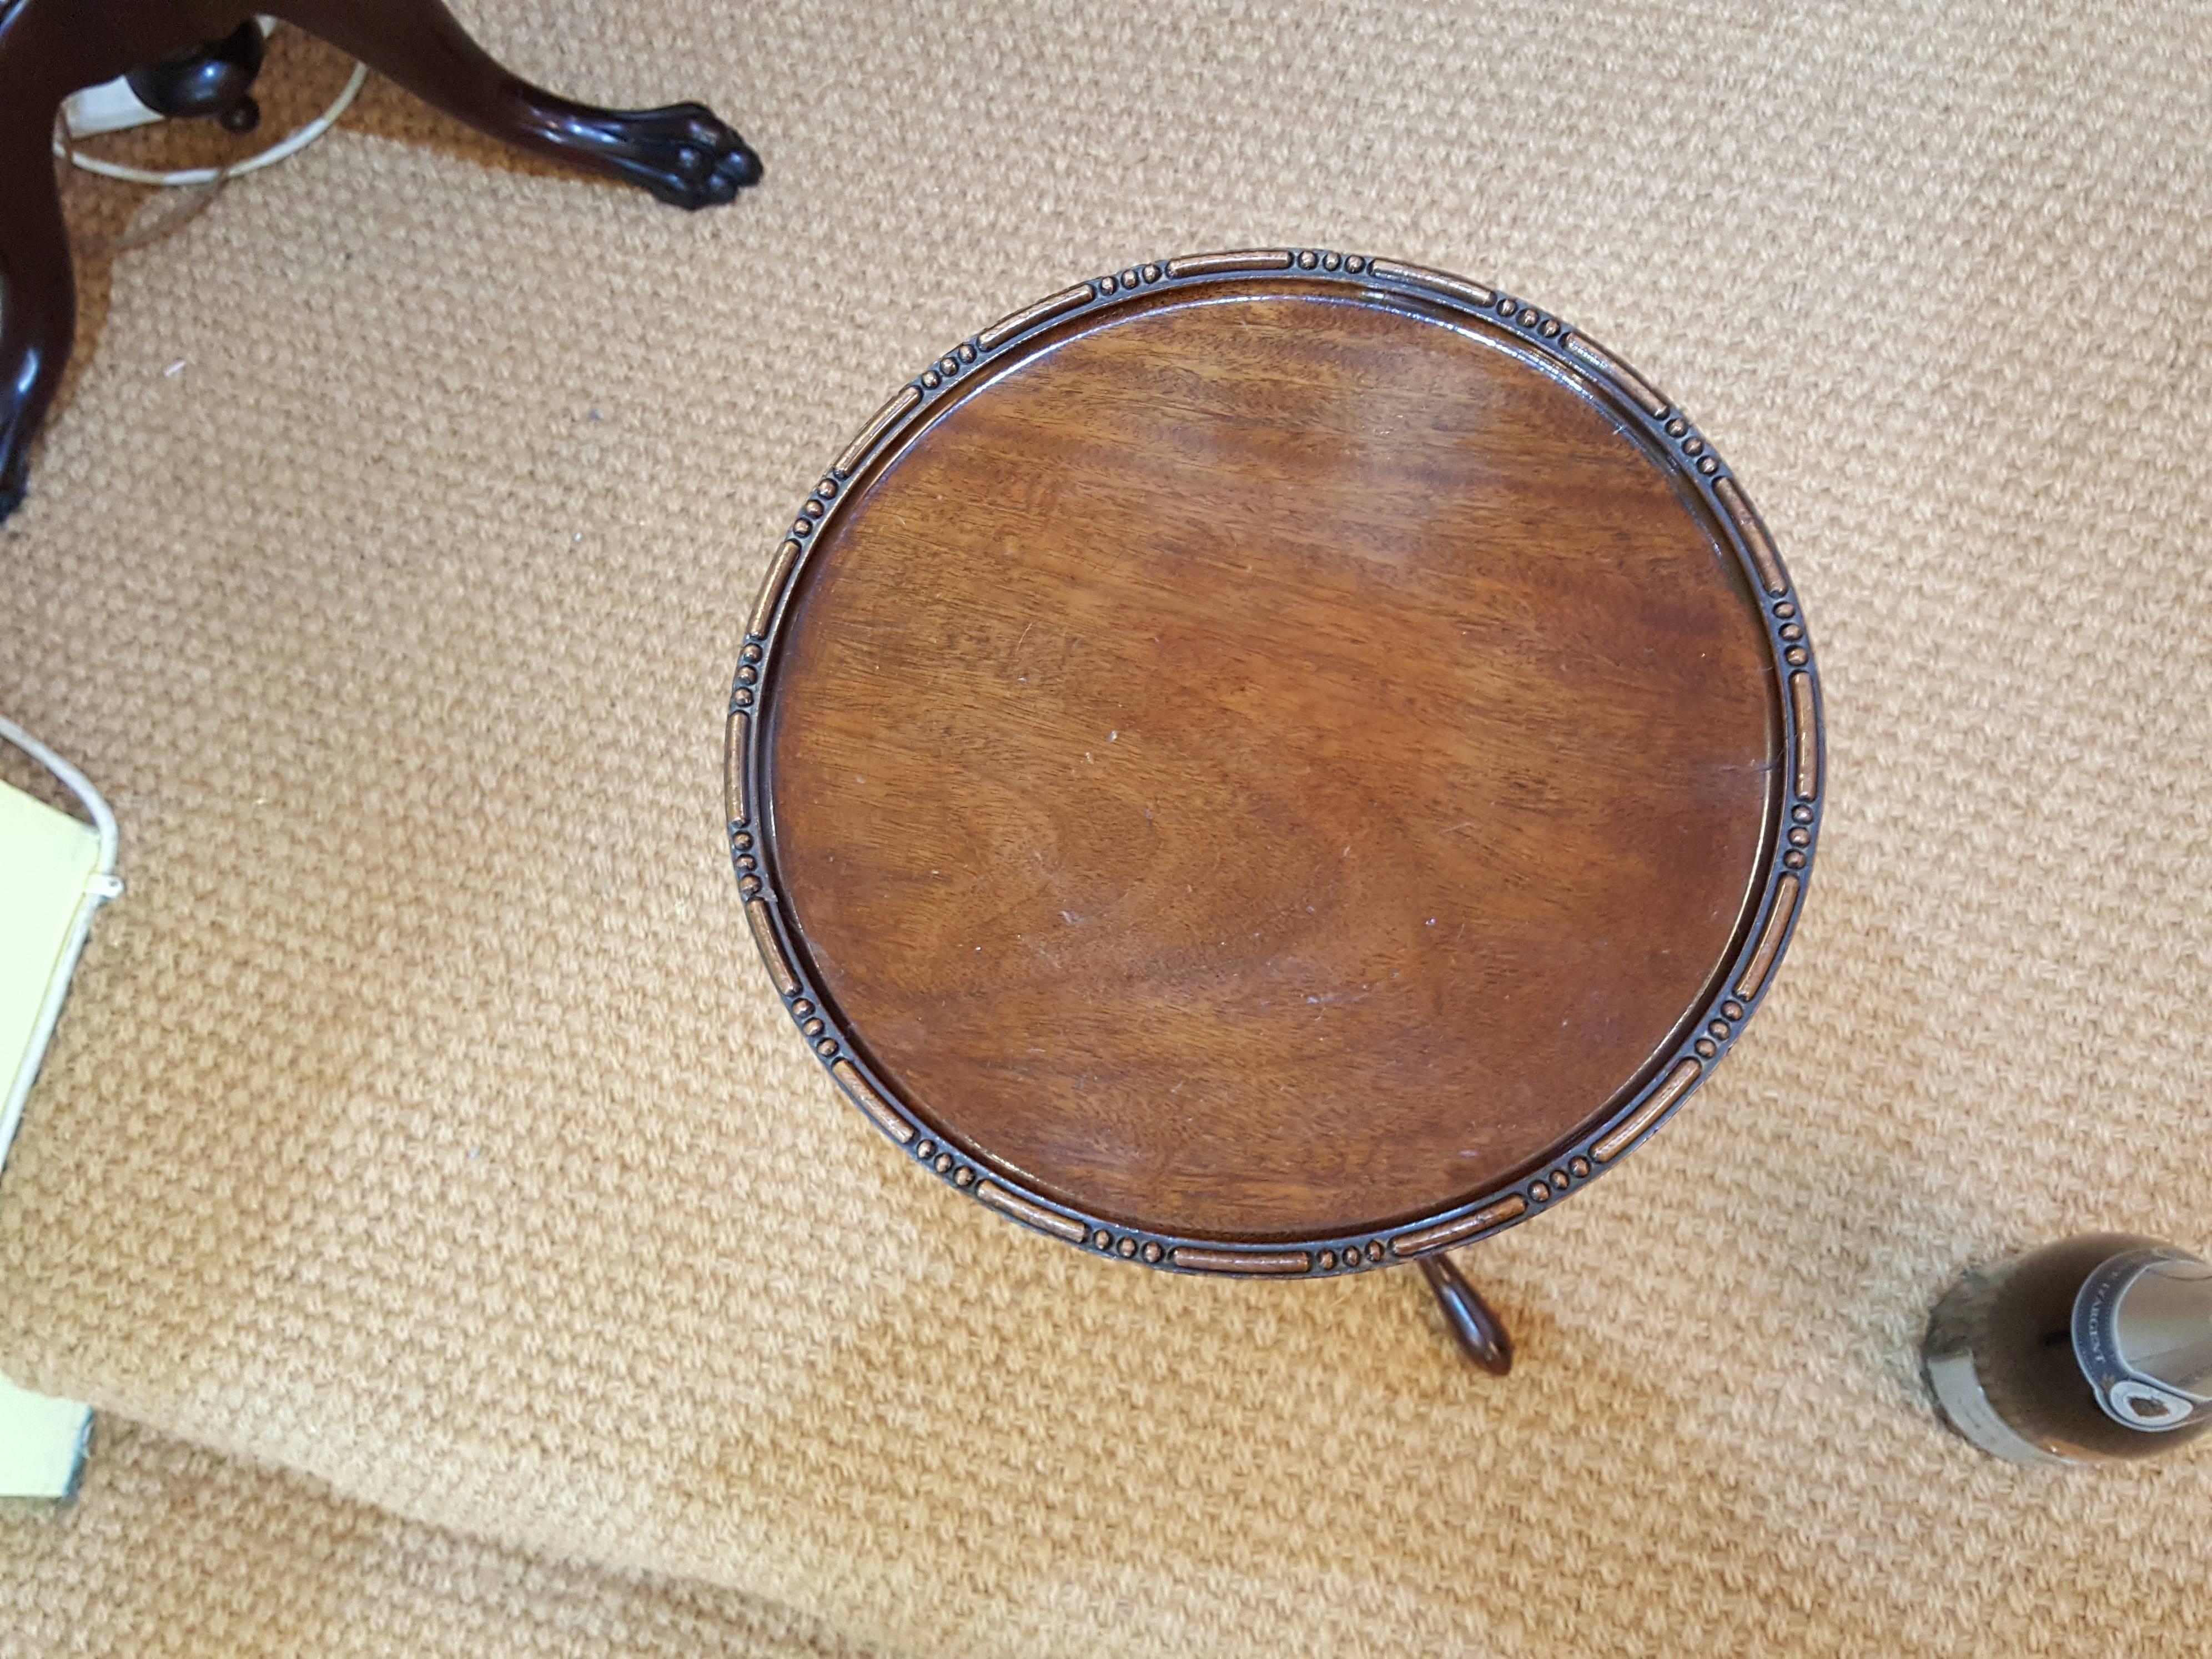 Late19th-early 20th century mahogany tripod wine table of Georgian style and of small proportions
Measures: 11